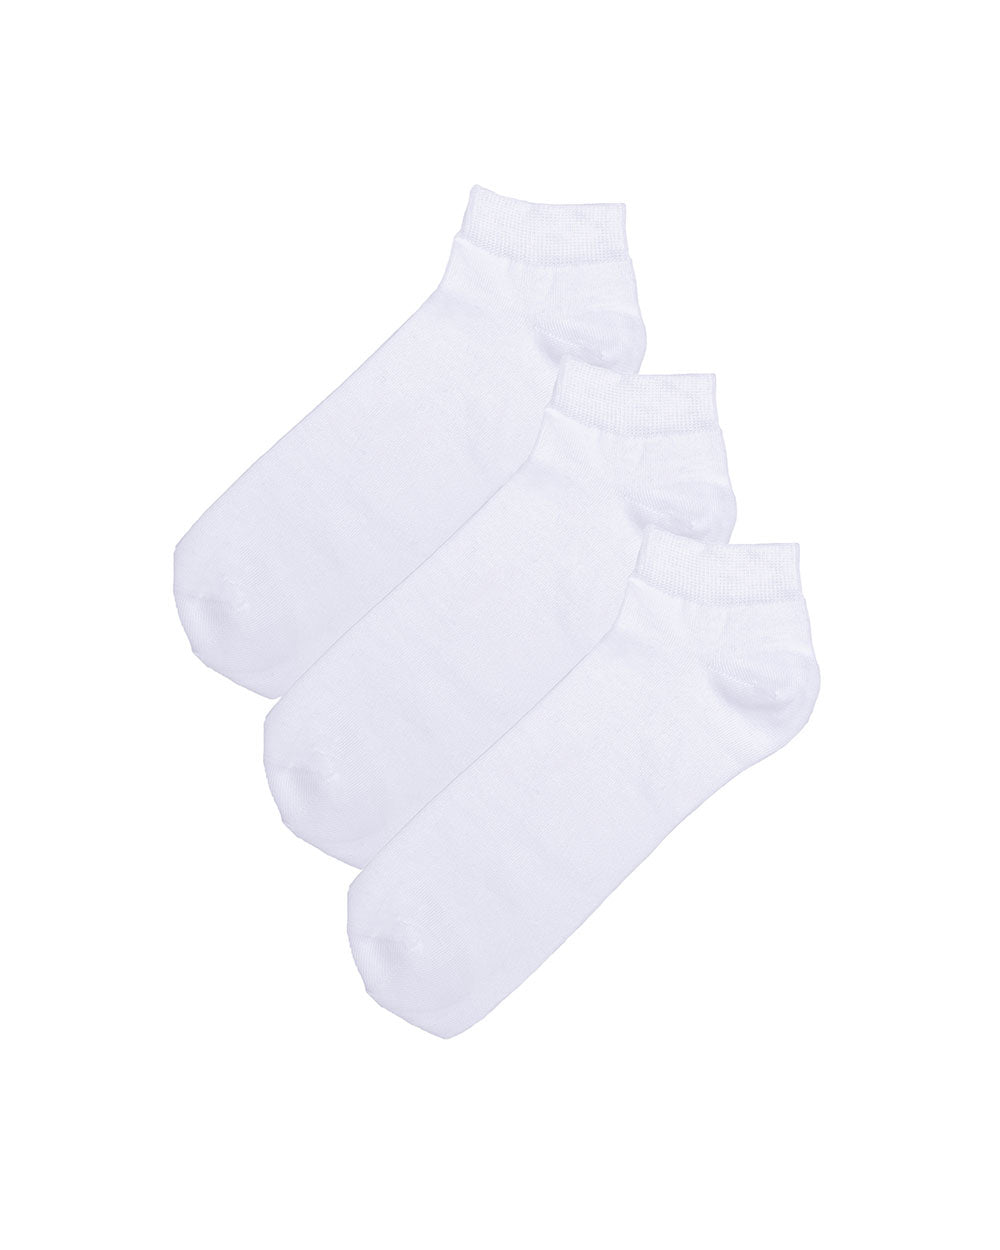 2t Ankle Socks 3 Pairs (white)